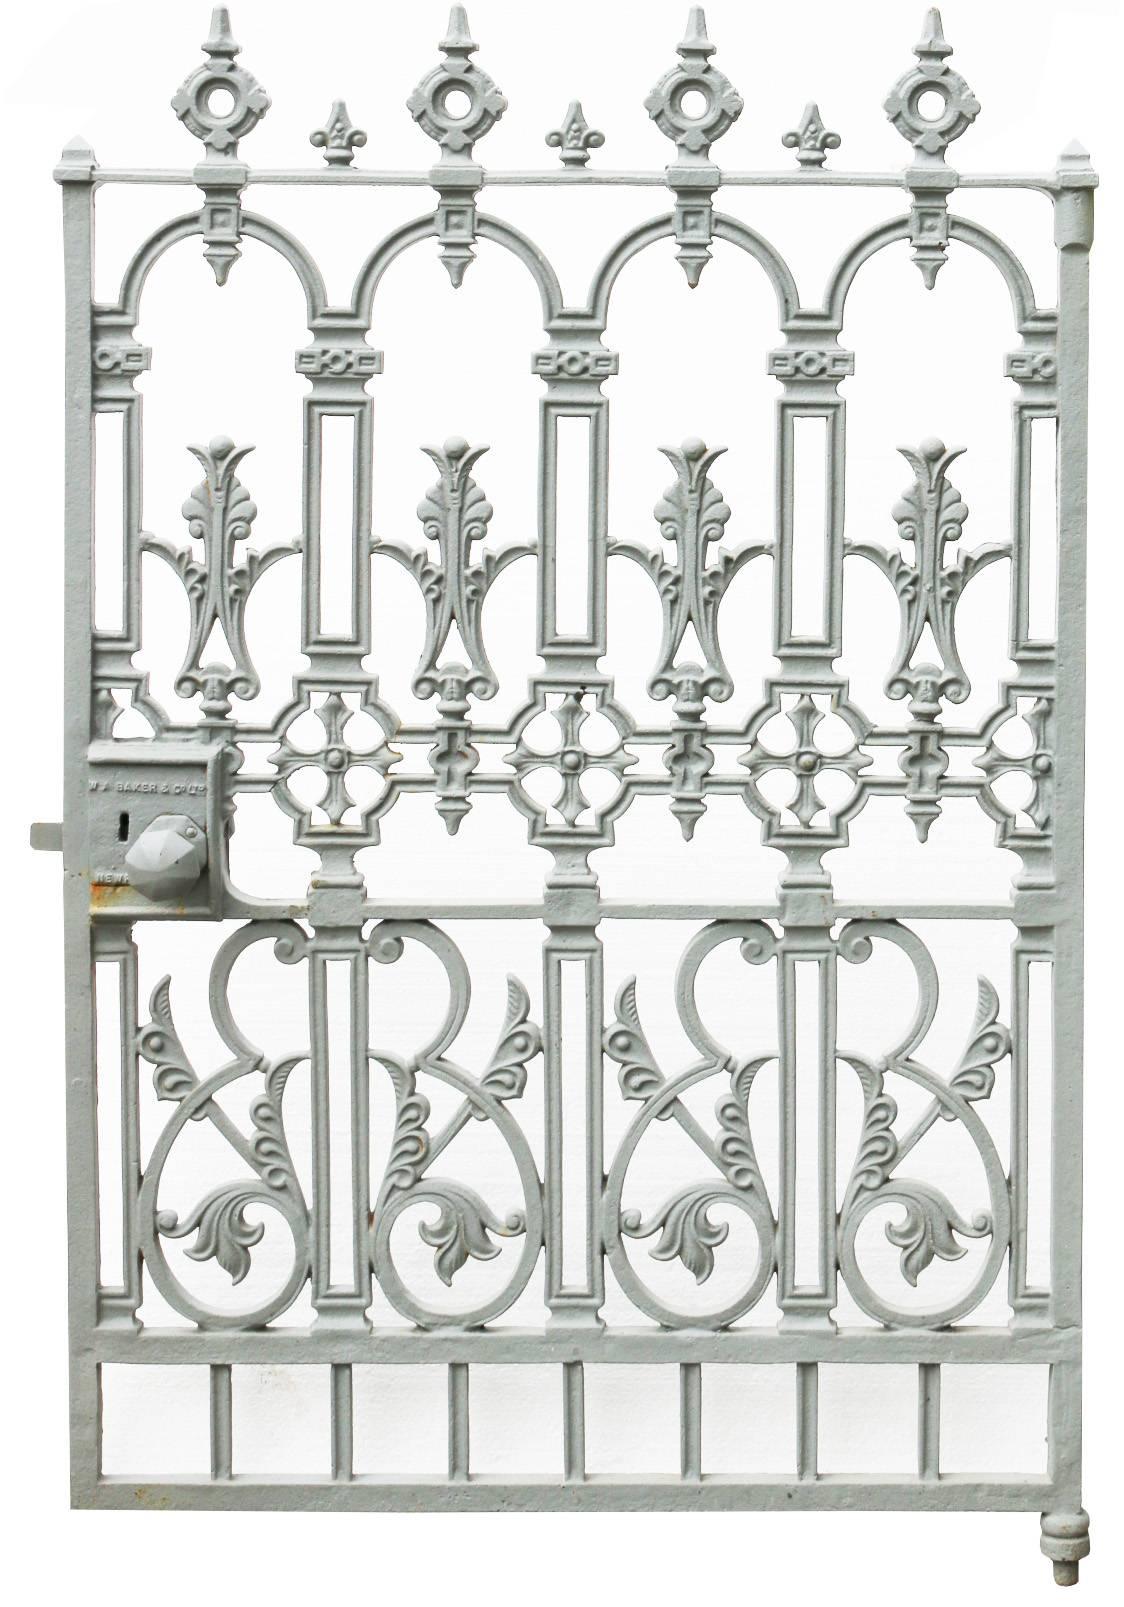 This gate has been shot blasted, primed and is ready to hang.
There are two original posts included.
Measure: Post height 151 cm (each)
The dimensions listed are for the gate.
Weight 110 kg.